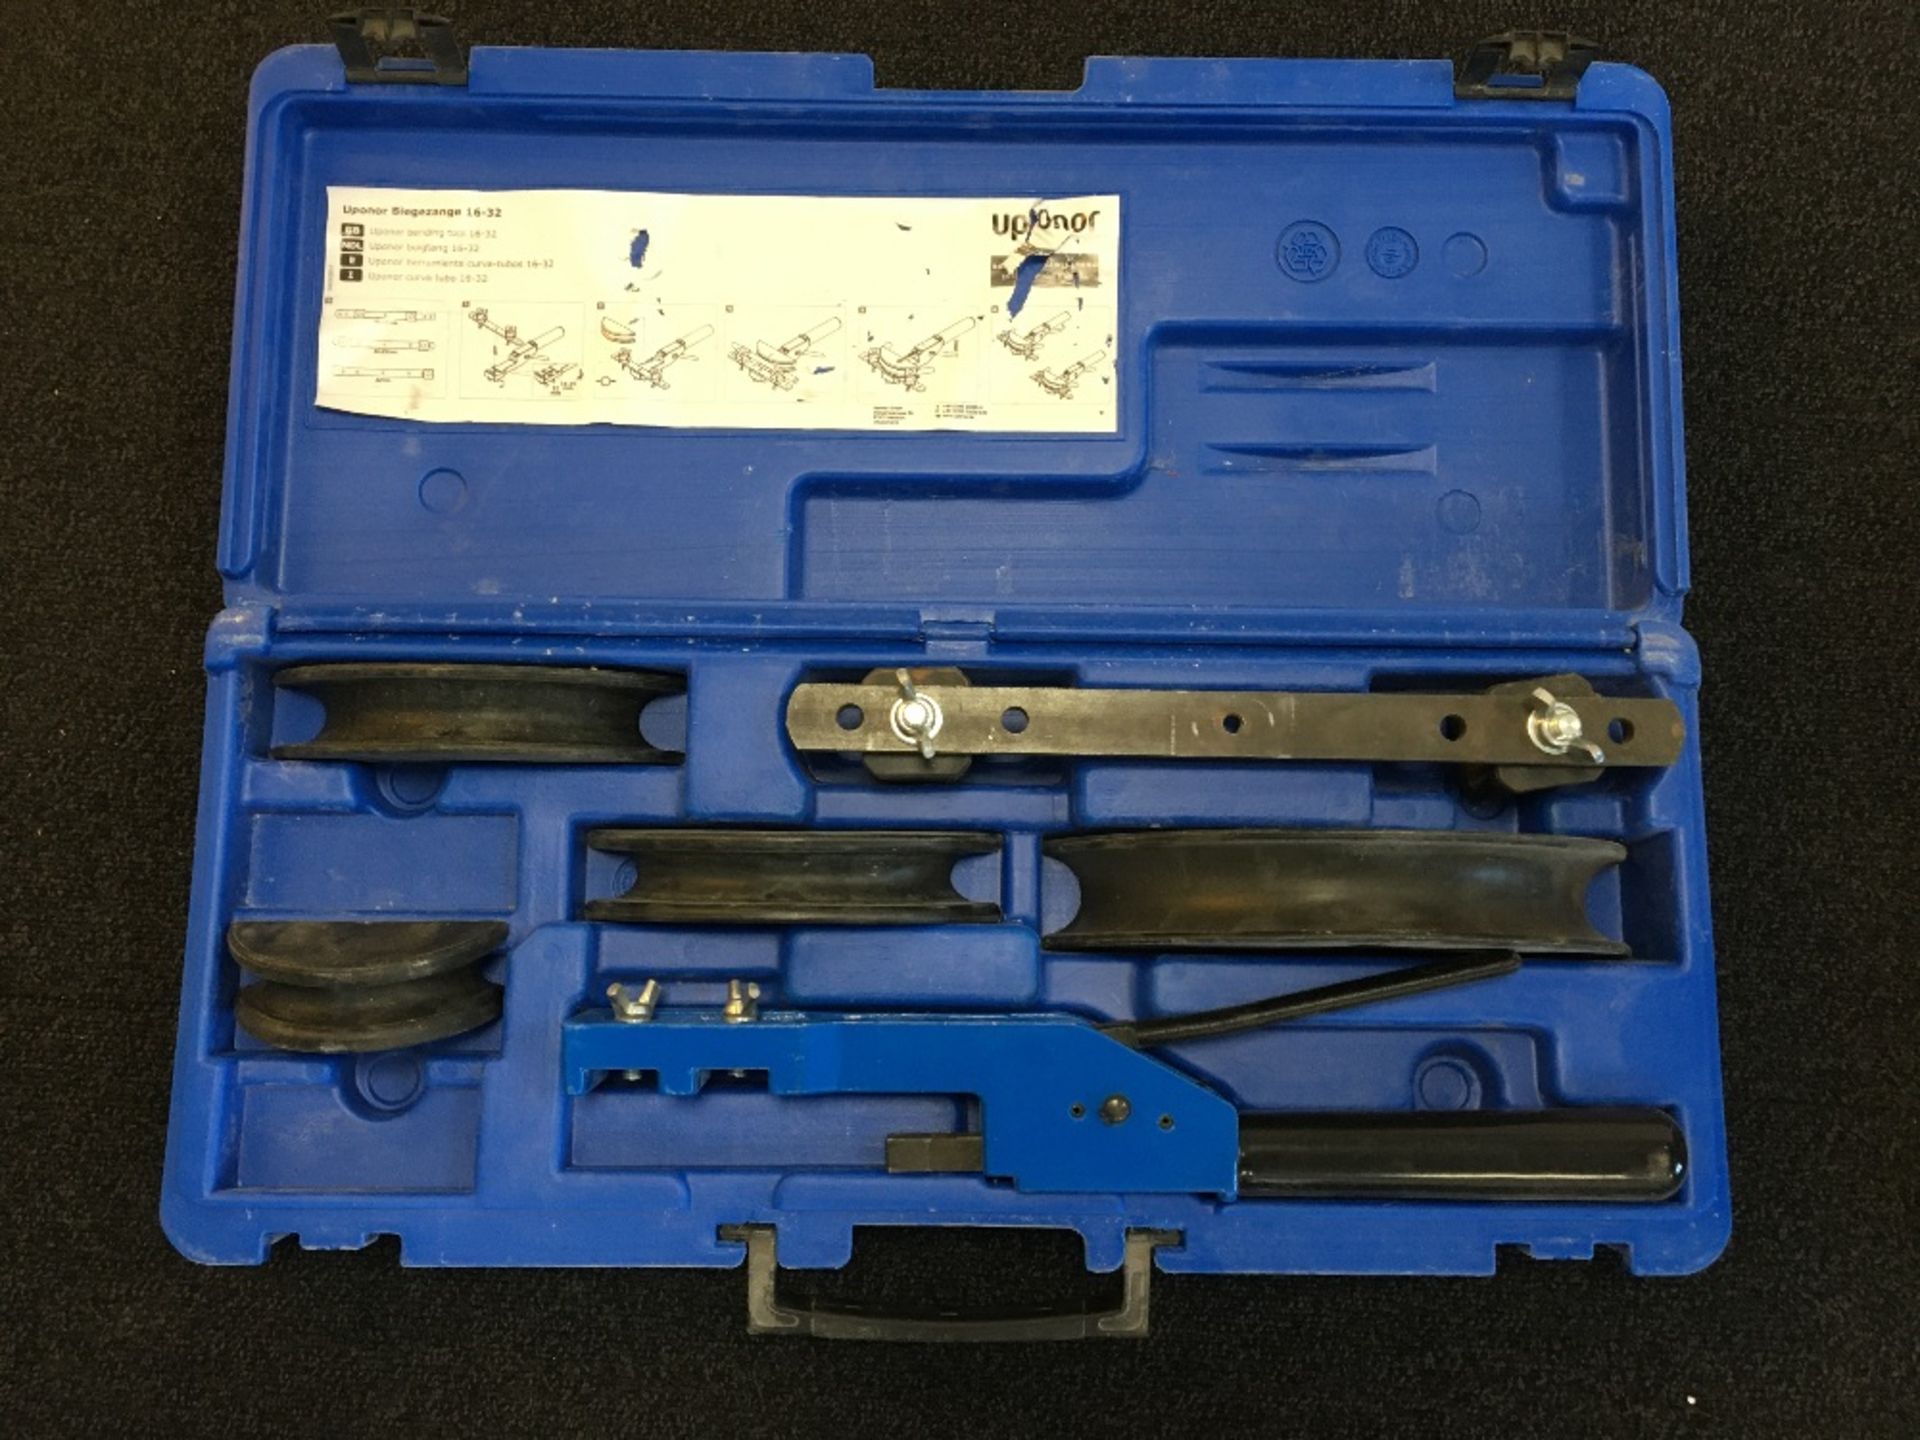 Uponor Bending Tool 16mm - 32mm with carry case - Image 2 of 4